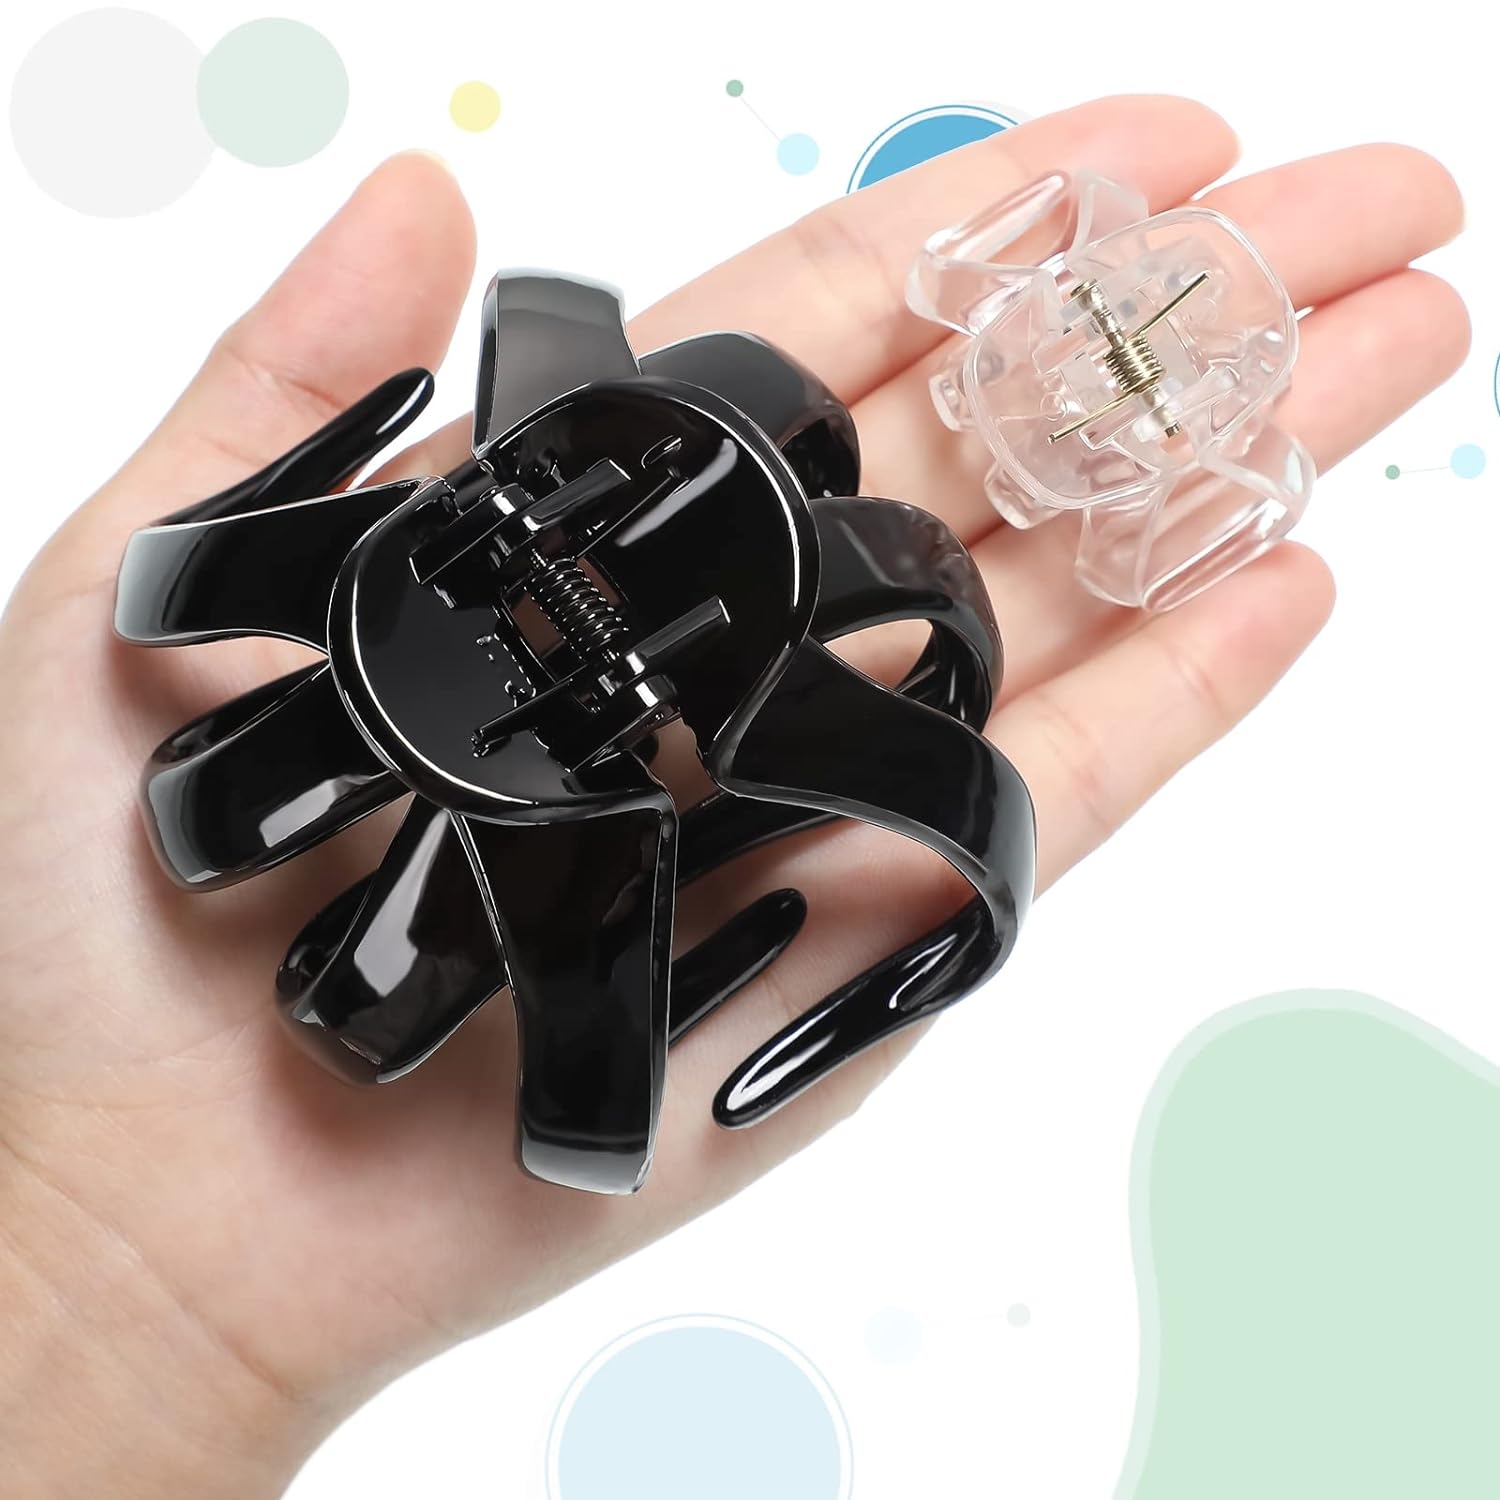 4 Pieces Large Grip Octopus Clip No Slip Spider Hair Clips Octopus Jaw Hair Clips for Thick Long Hair Women Girls (Black, Clear,4.0 cm and 8.5 cm)